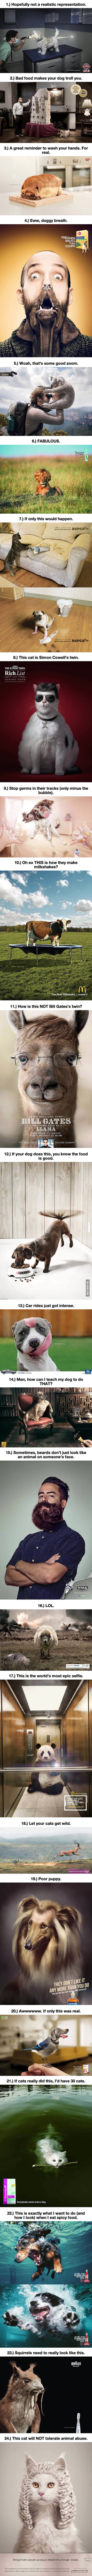 The 24 Most Ridiculously Clever Advertisements That Used Animals.